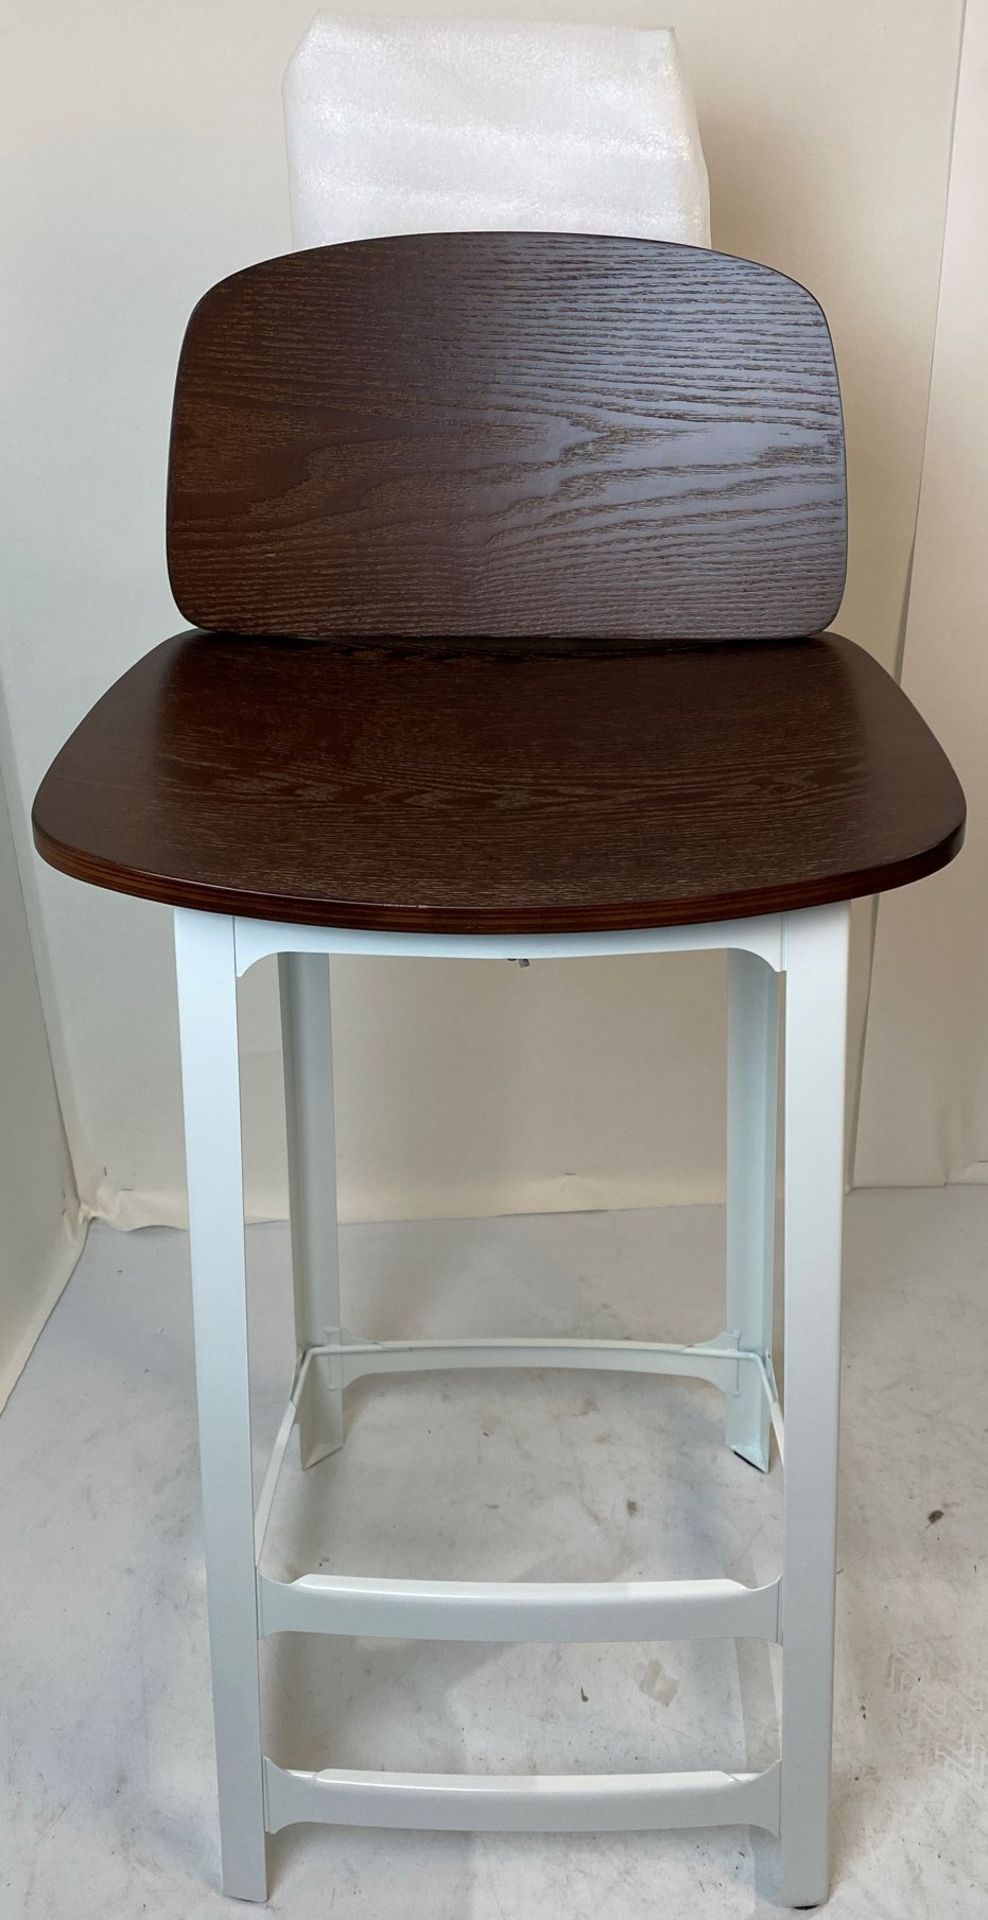 A white metal Dart high bar stool with wooden seat and back rest